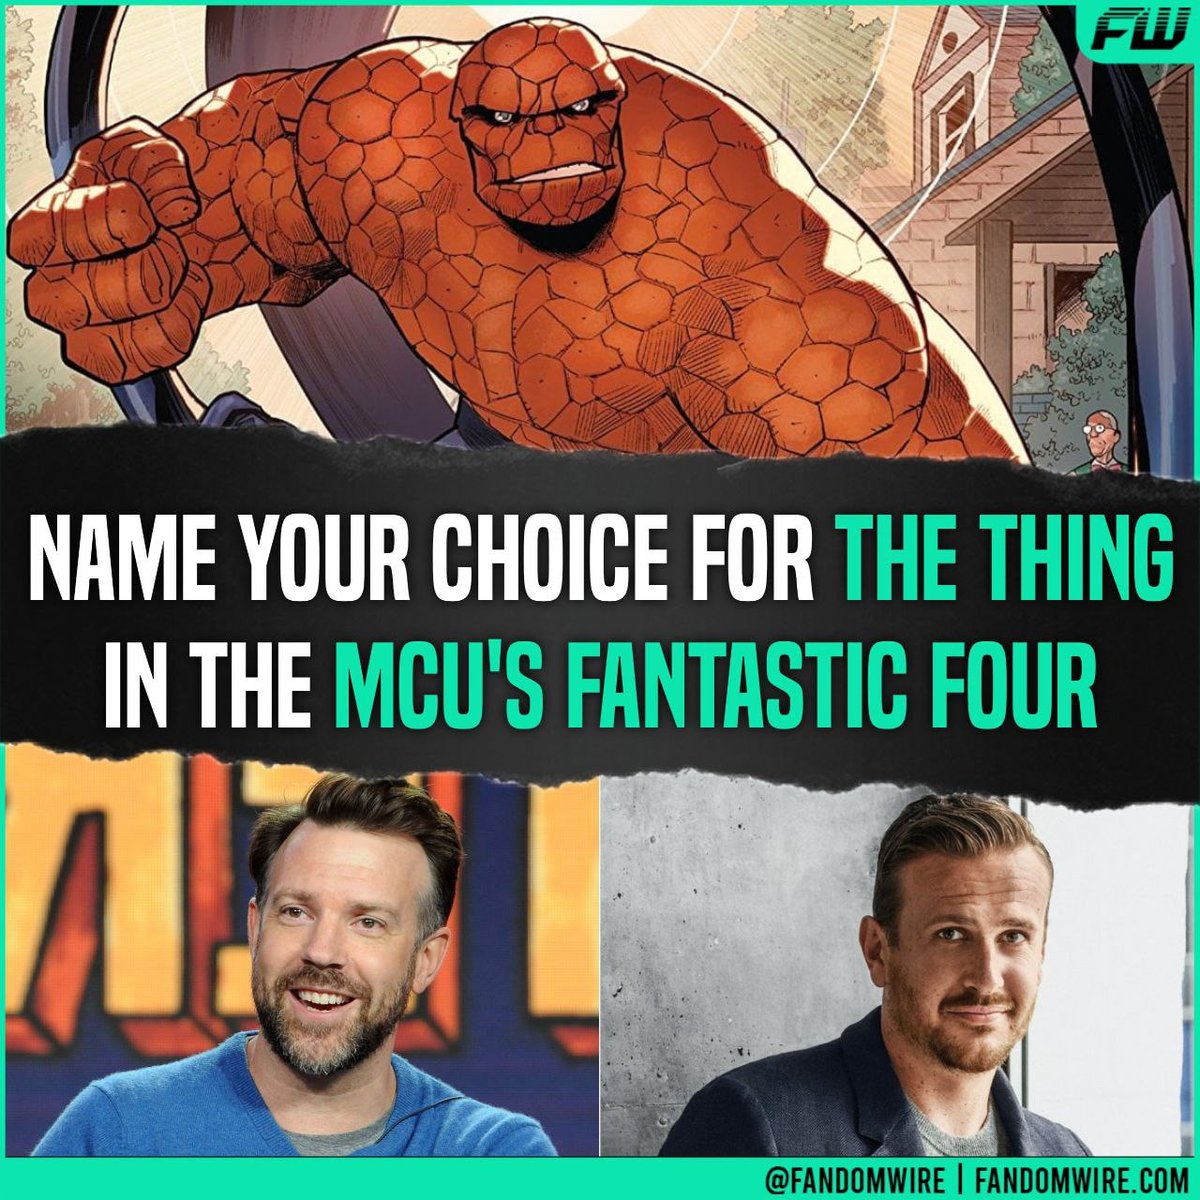 Name your choice for The Thing 💪🏻
#TheThing #FantasticFour #BenGrimm